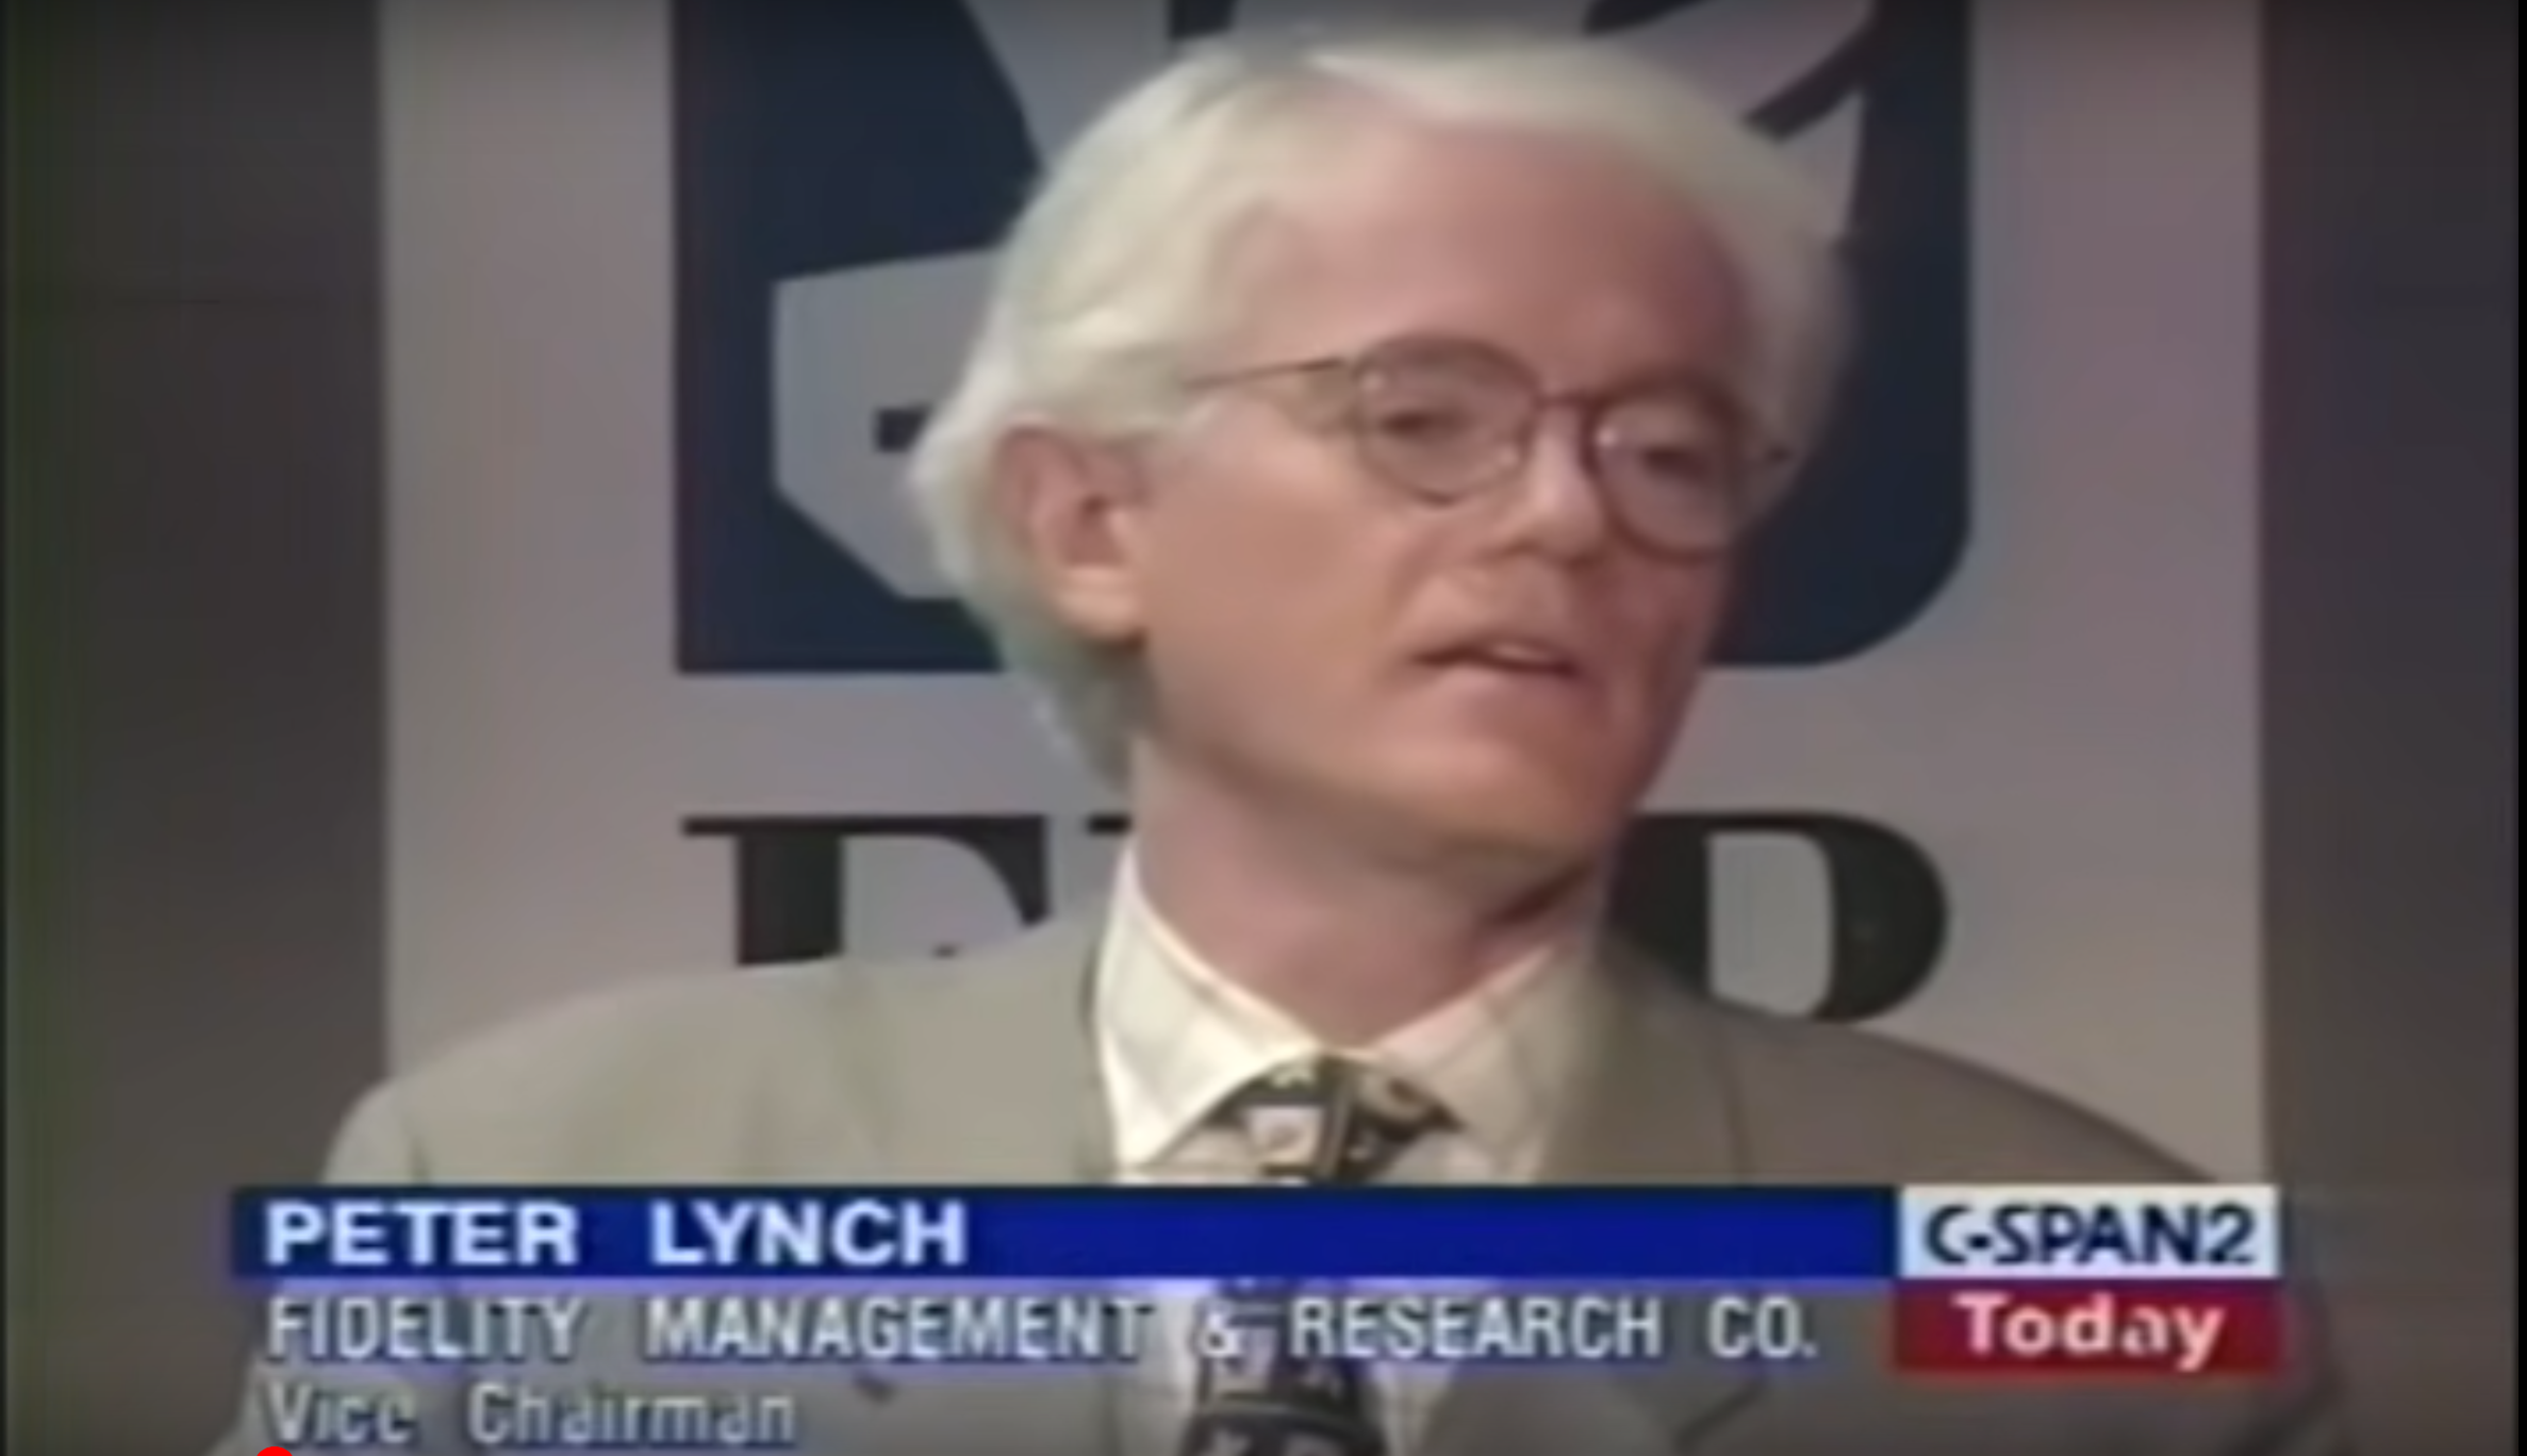 10 Most Dangerous Things People Say About Stocks, According To Peter Lynch (VIDEO)